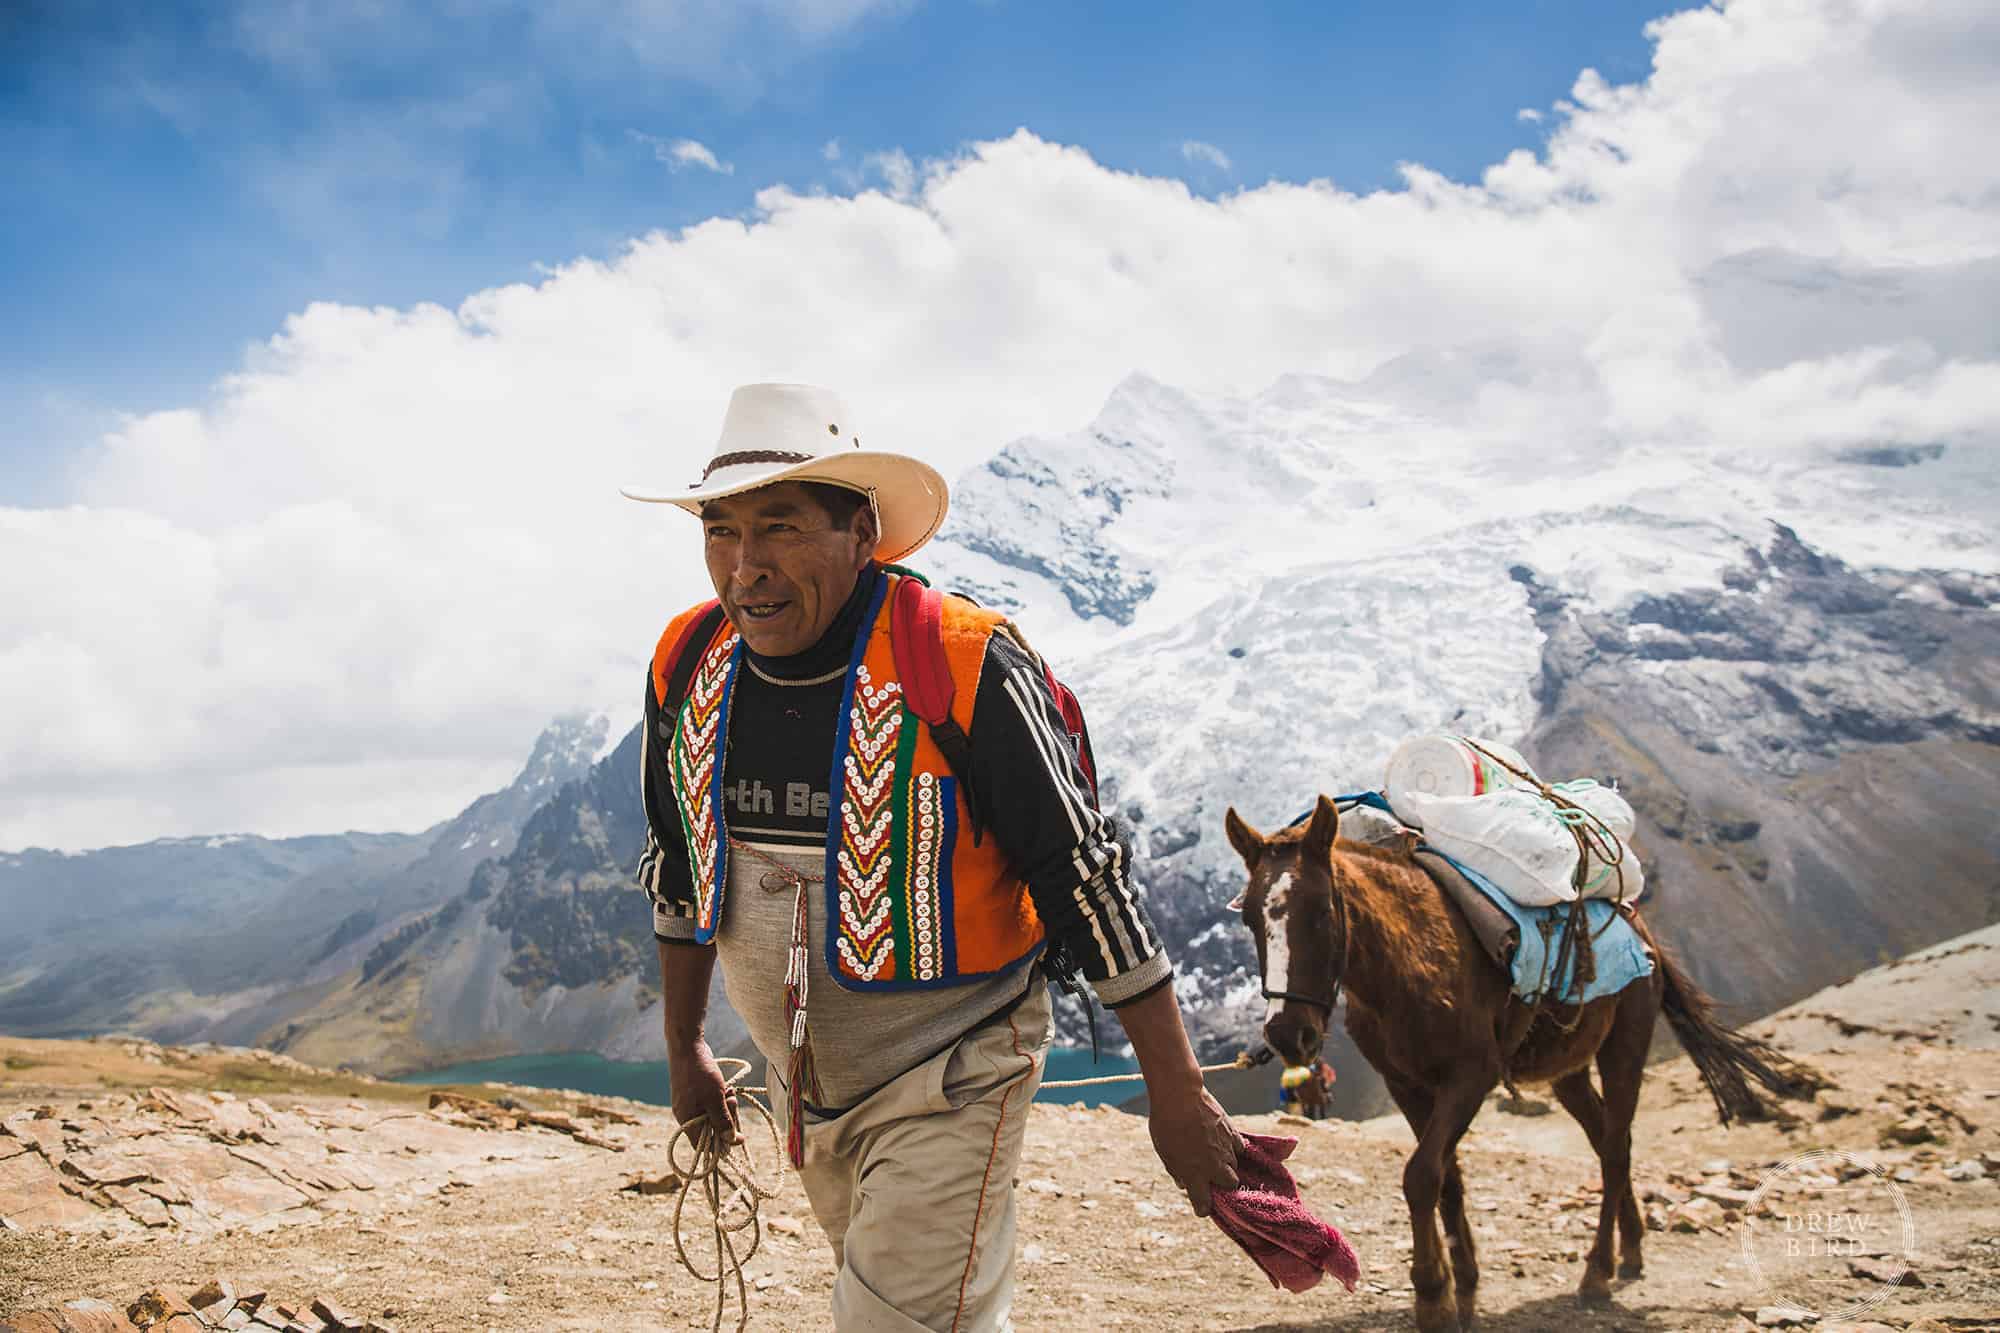 A mountain guide leads a pack horse with Ausangate tropical glacier in background in the mountains of Peru. San Francisco Editorial Photographer Drew Bird.